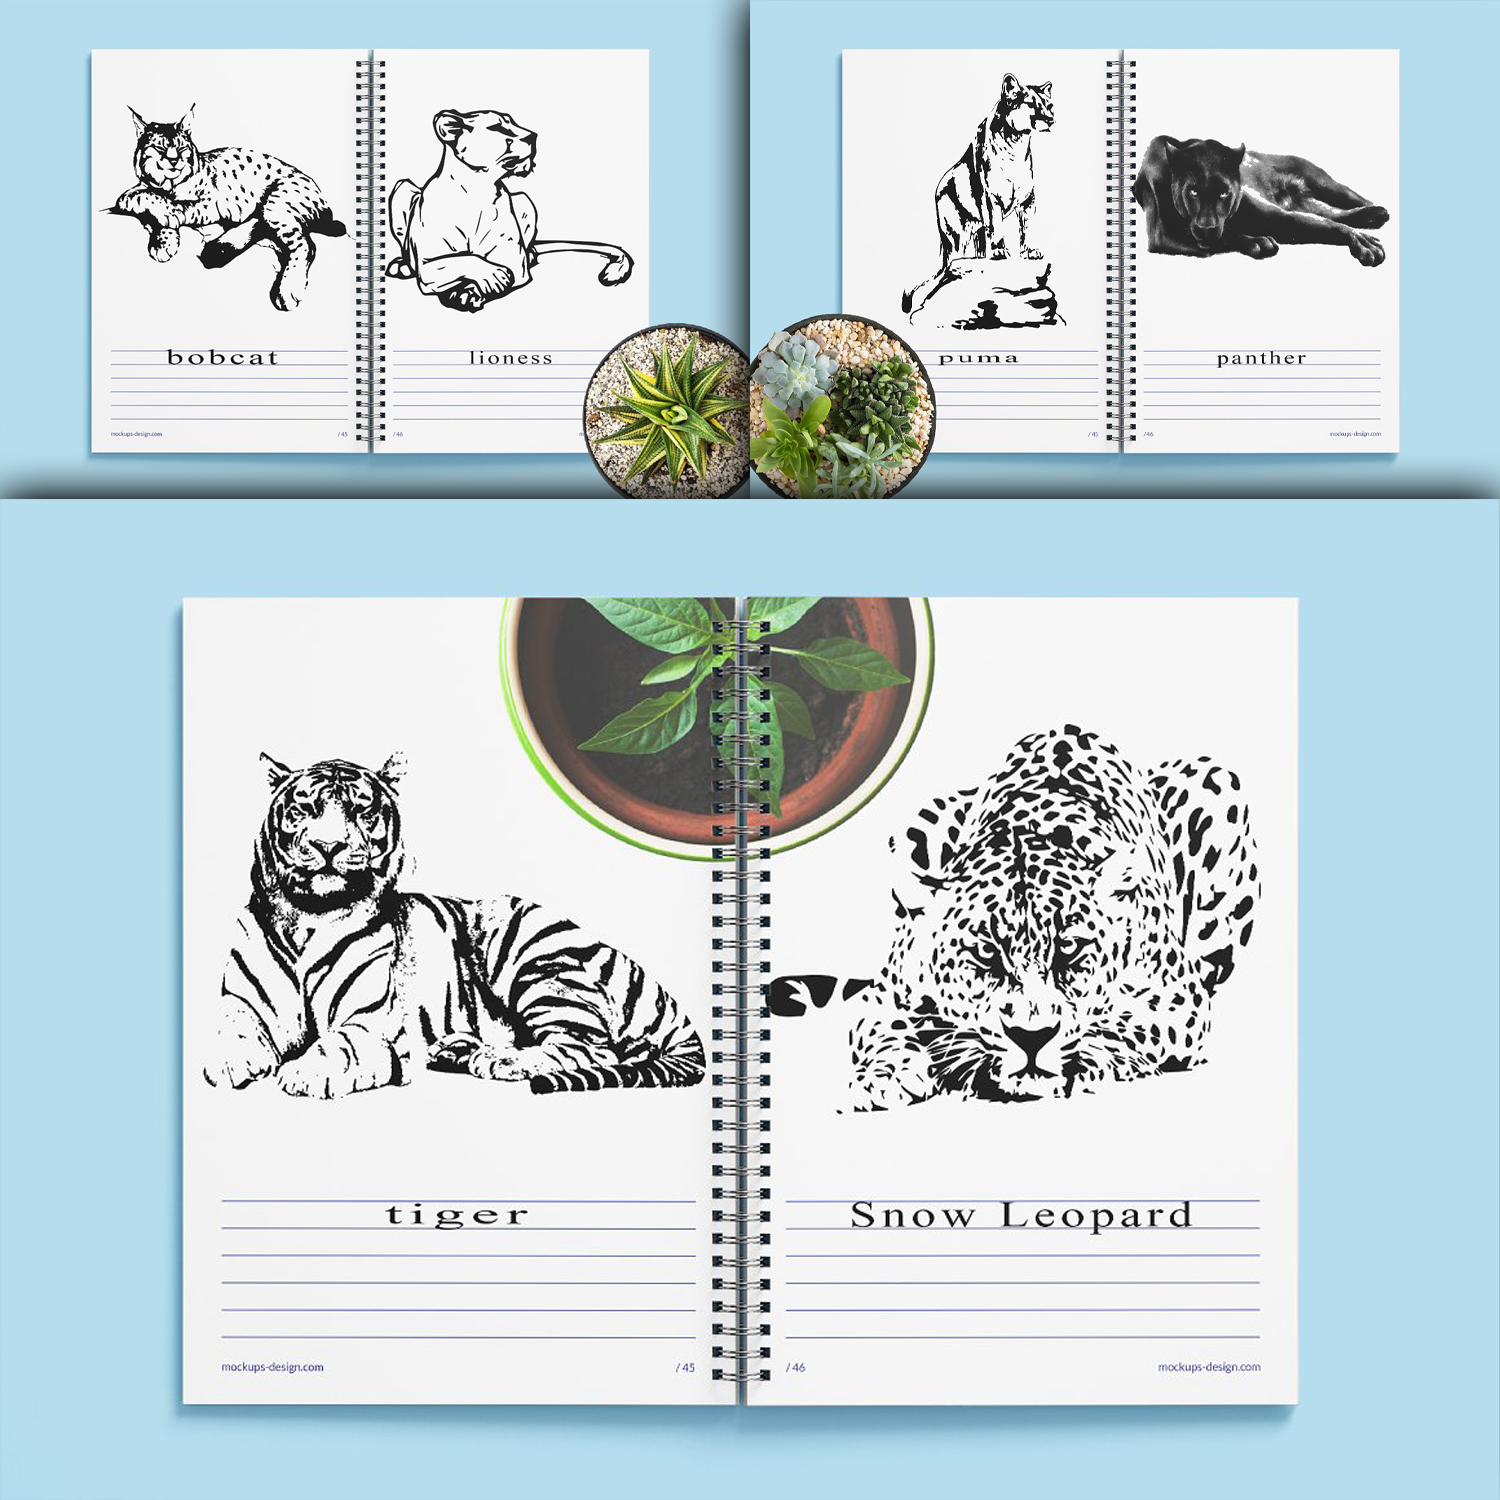 Preview wild cat family. vector illustration.